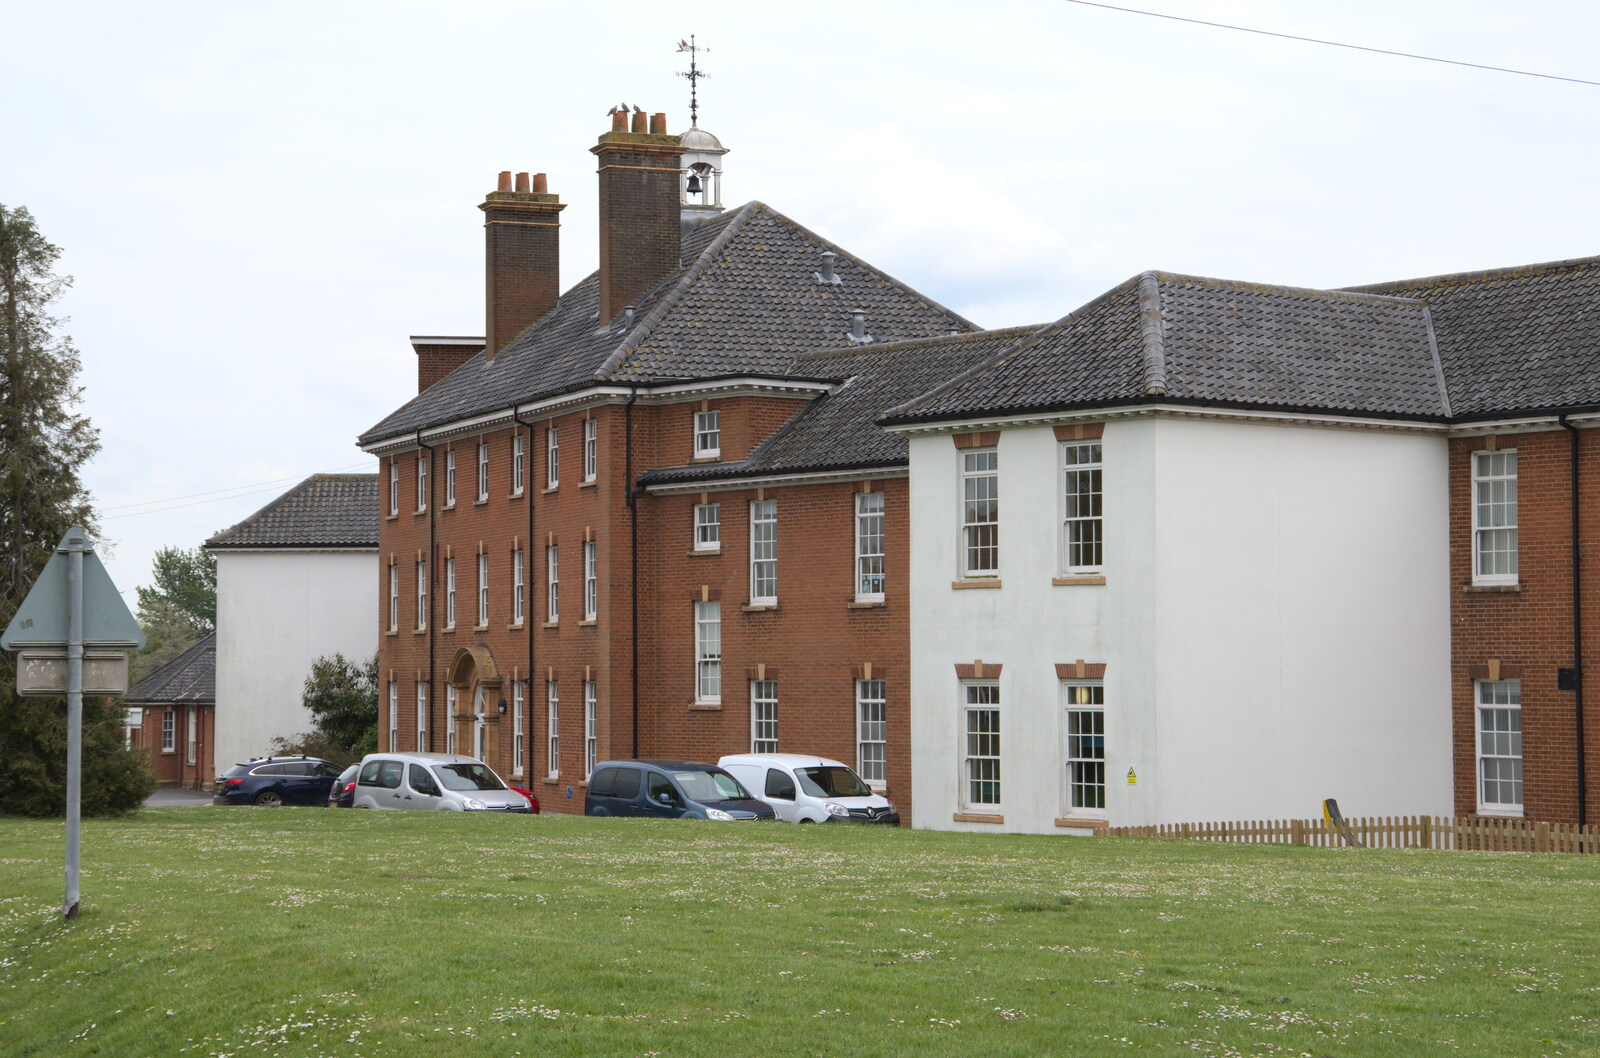 Hartismere Hospital from The Quest for Rapsy Tapsy Lane, Eye, Suffolk - 6th May 2020